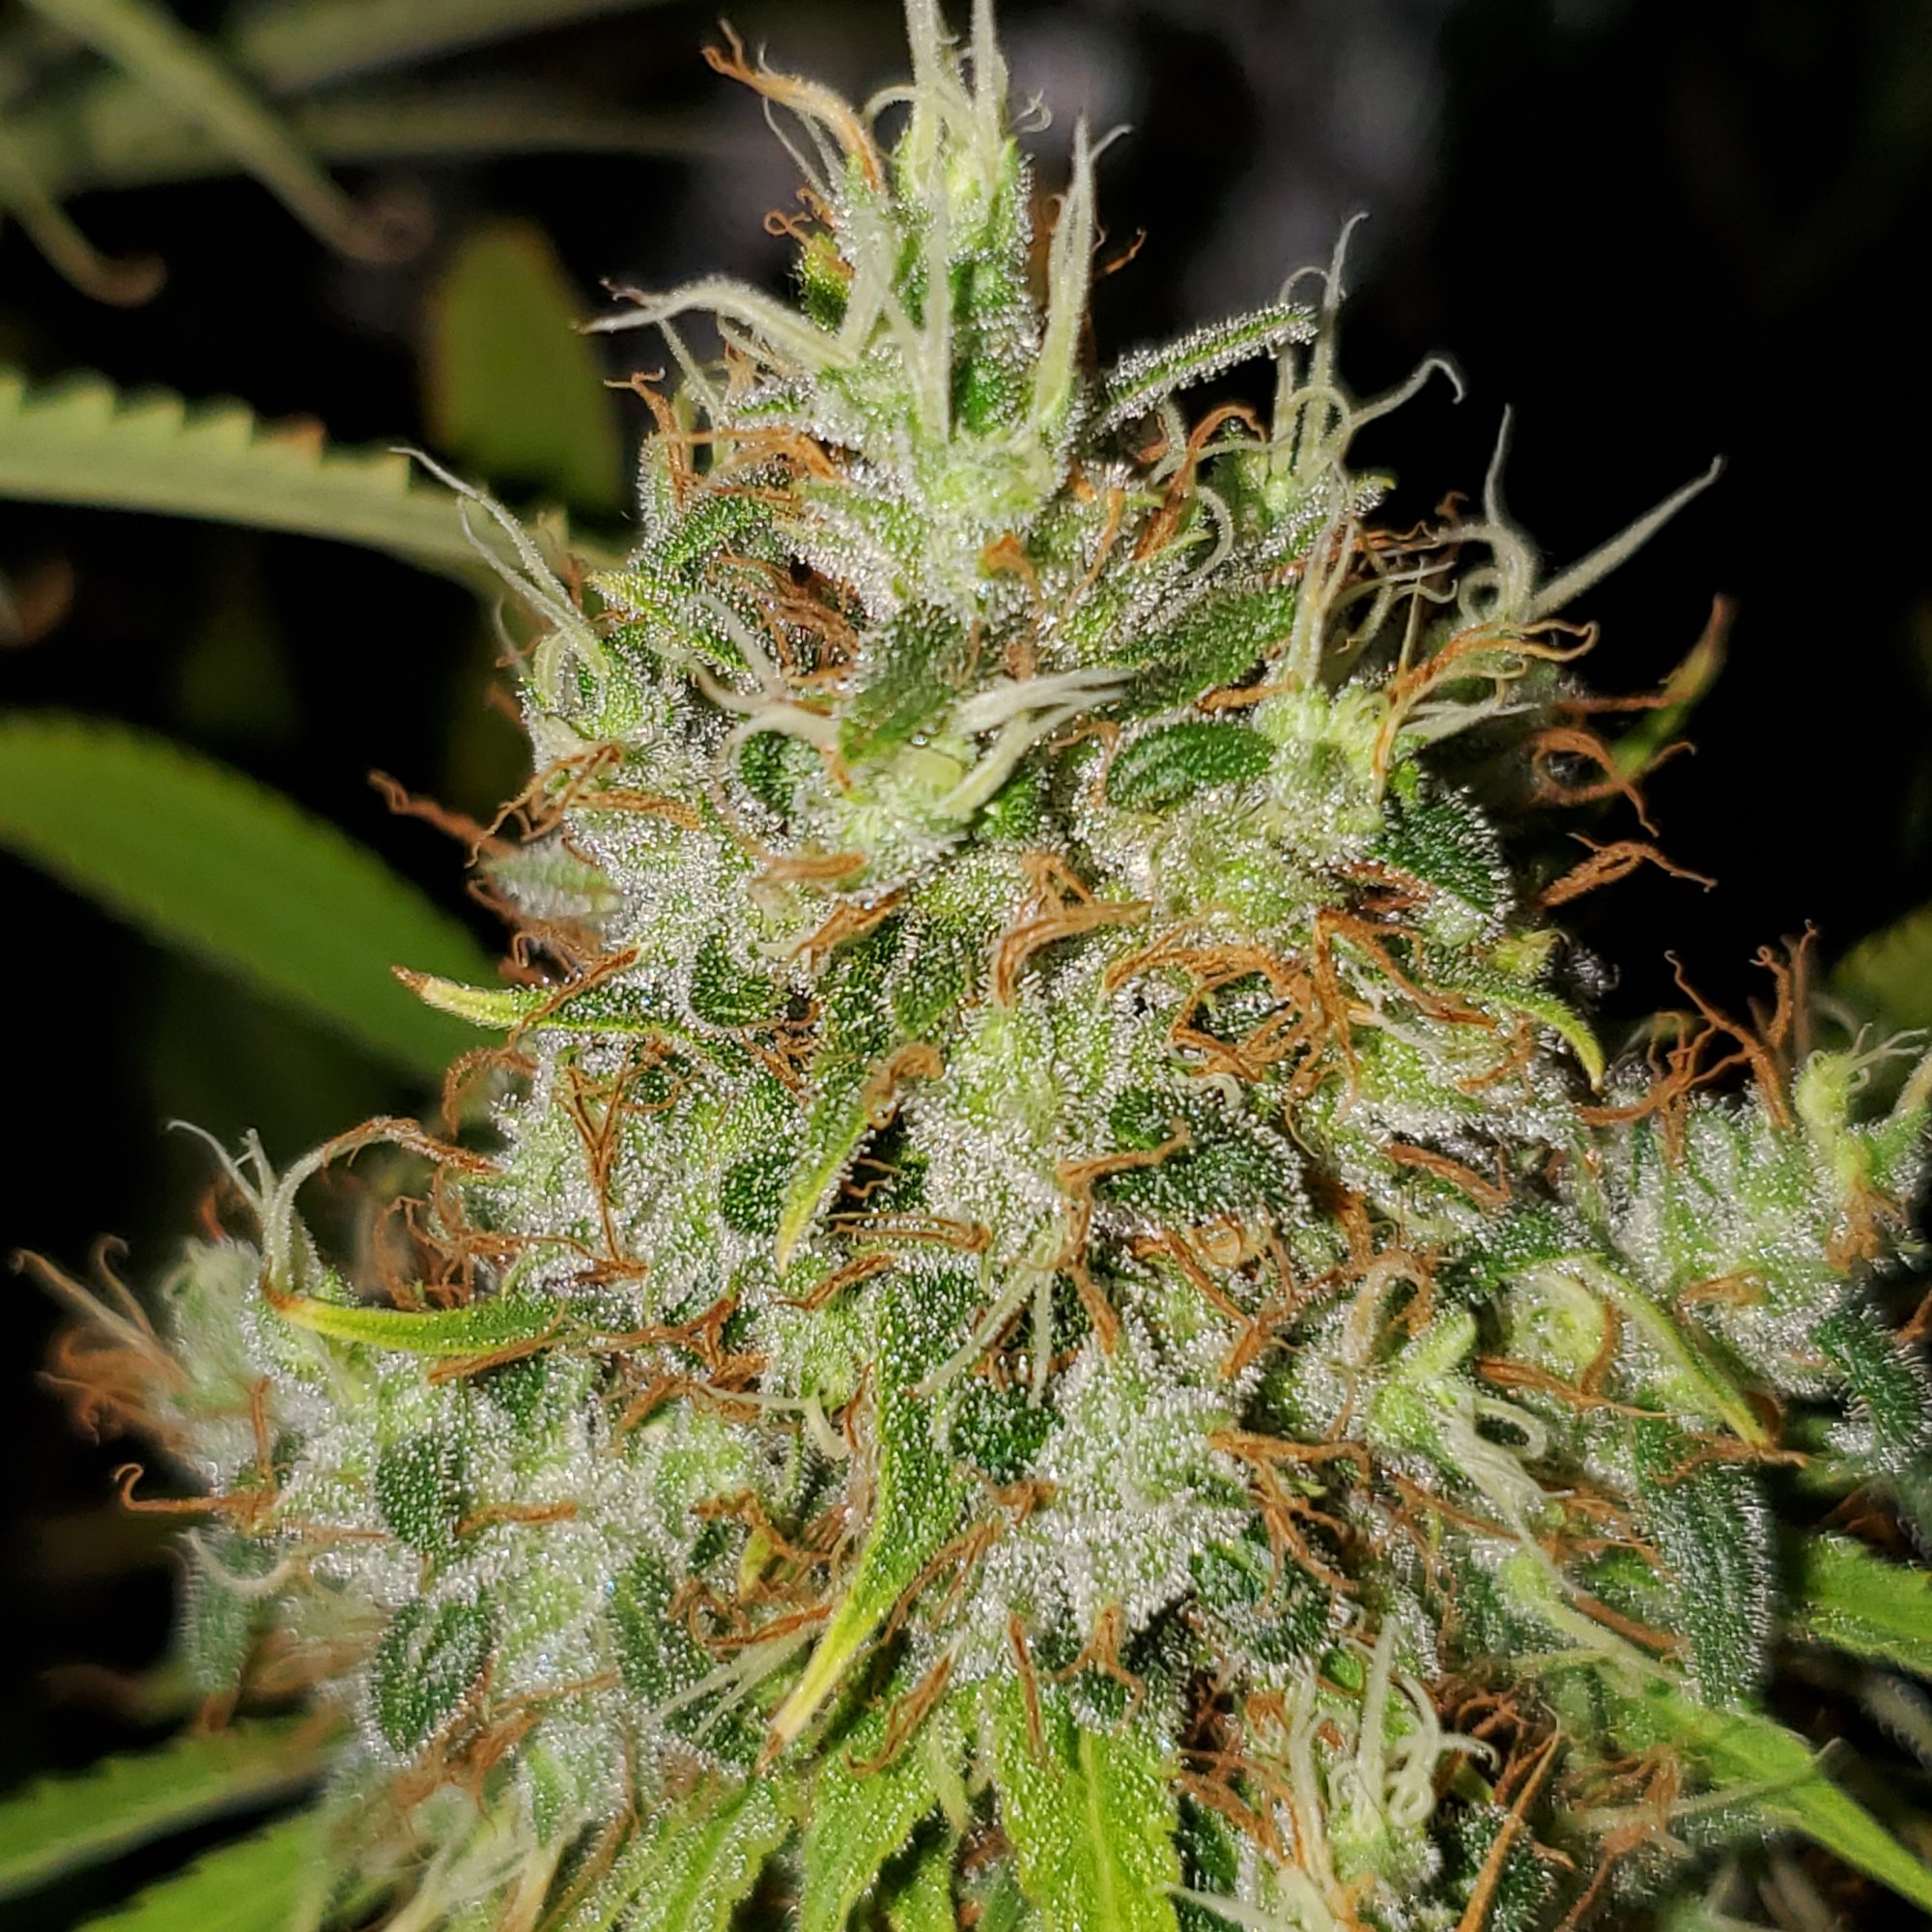 Harvest oct 17th 24th or 31st need help plz 5